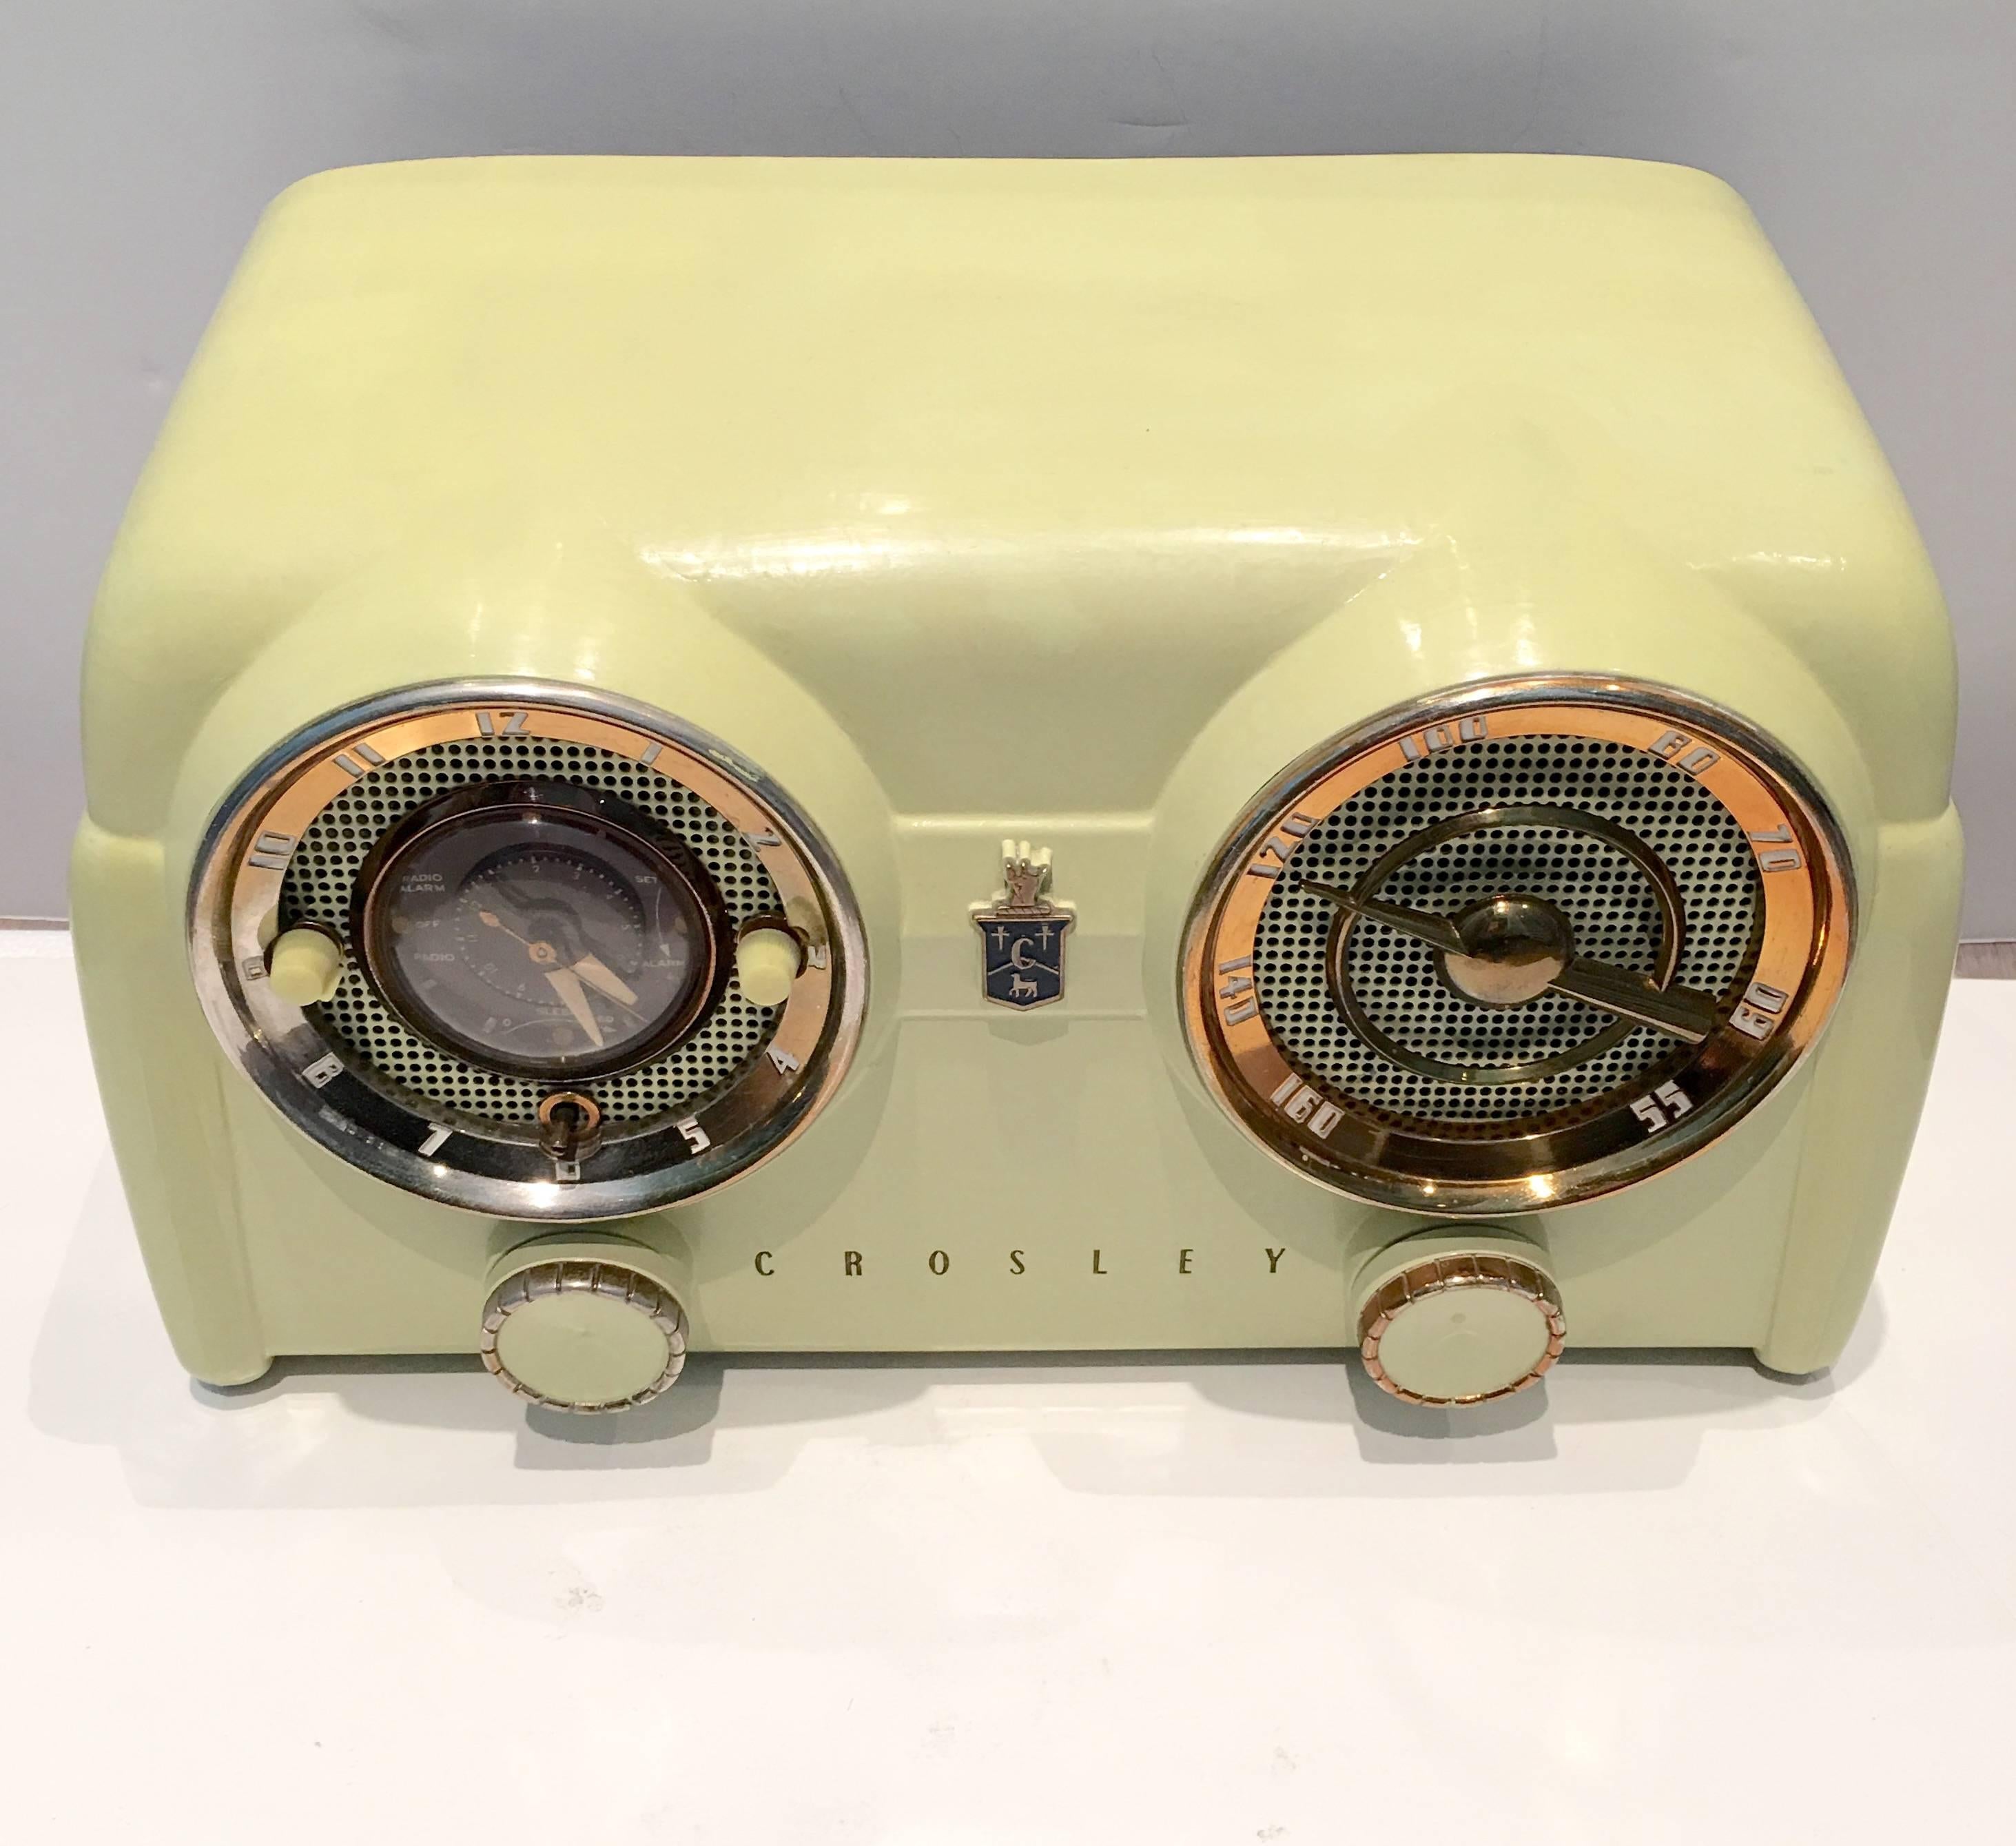 Rare 1950s Art Deco design Crosley tube "Dashboard" clock/radio in chartreuse green. Model #D25CE, features a rare operational clock and AM radio, Bakelite shell, original knobs and maintains the original manufactures label on the